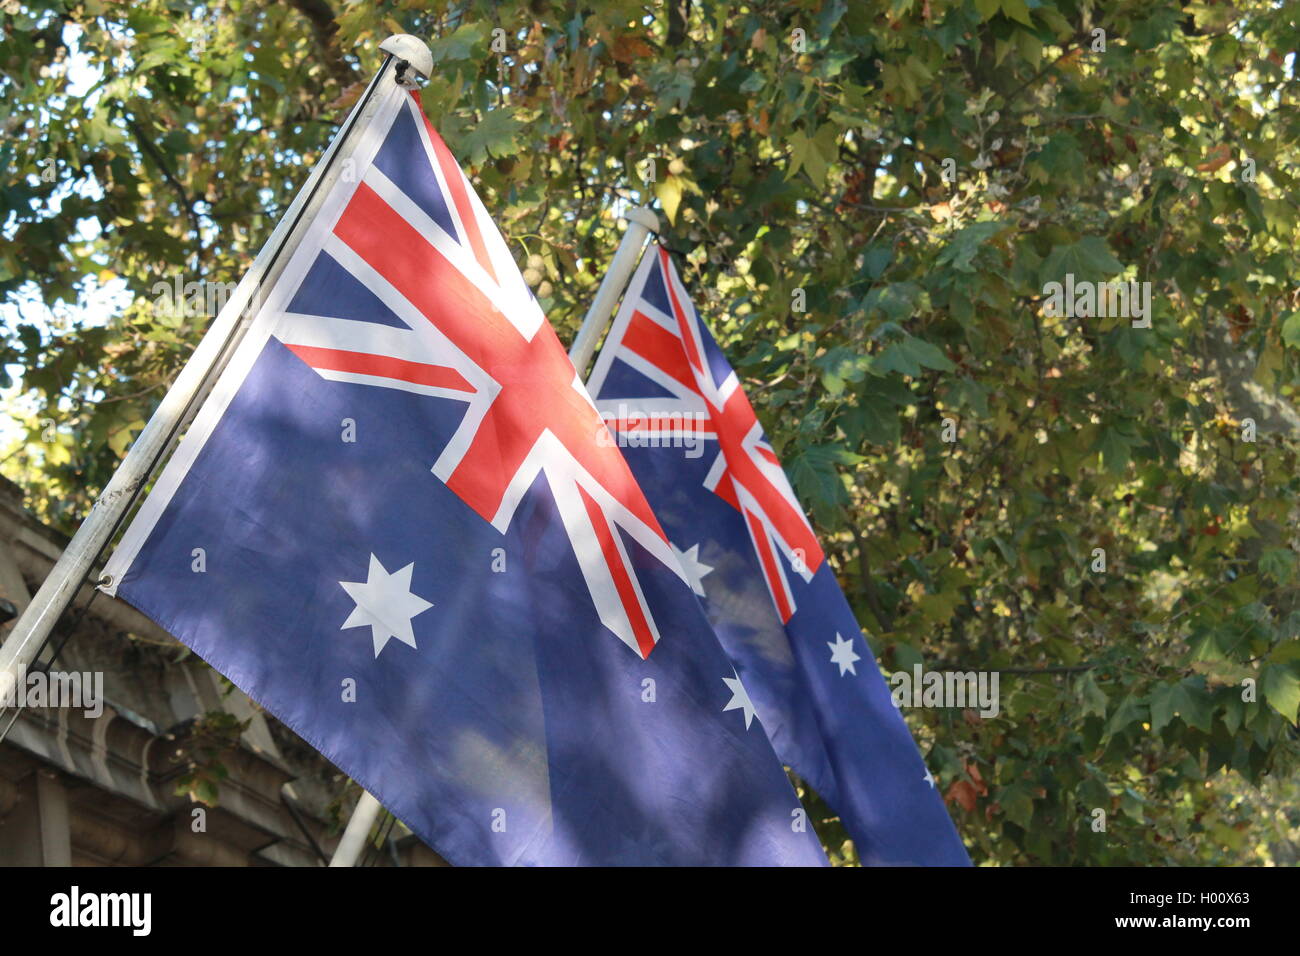 Australian flag, flag of Australia, defaced blue ensign, Union Jack in the canton, seven pointed star, Commonwealth Star, 1901 Stock Photo